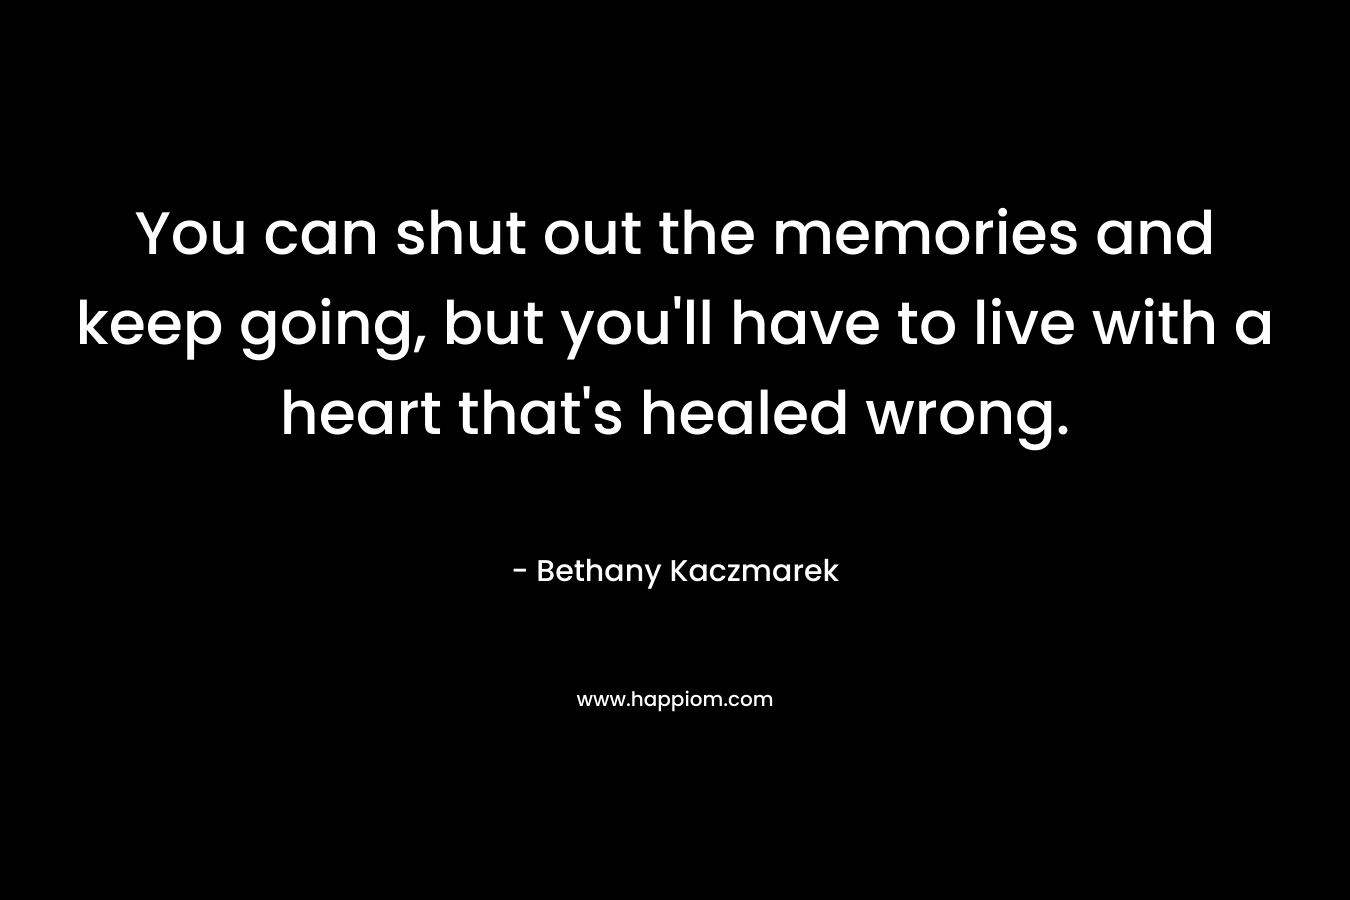 You can shut out the memories and keep going, but you'll have to live with a heart that's healed wrong.